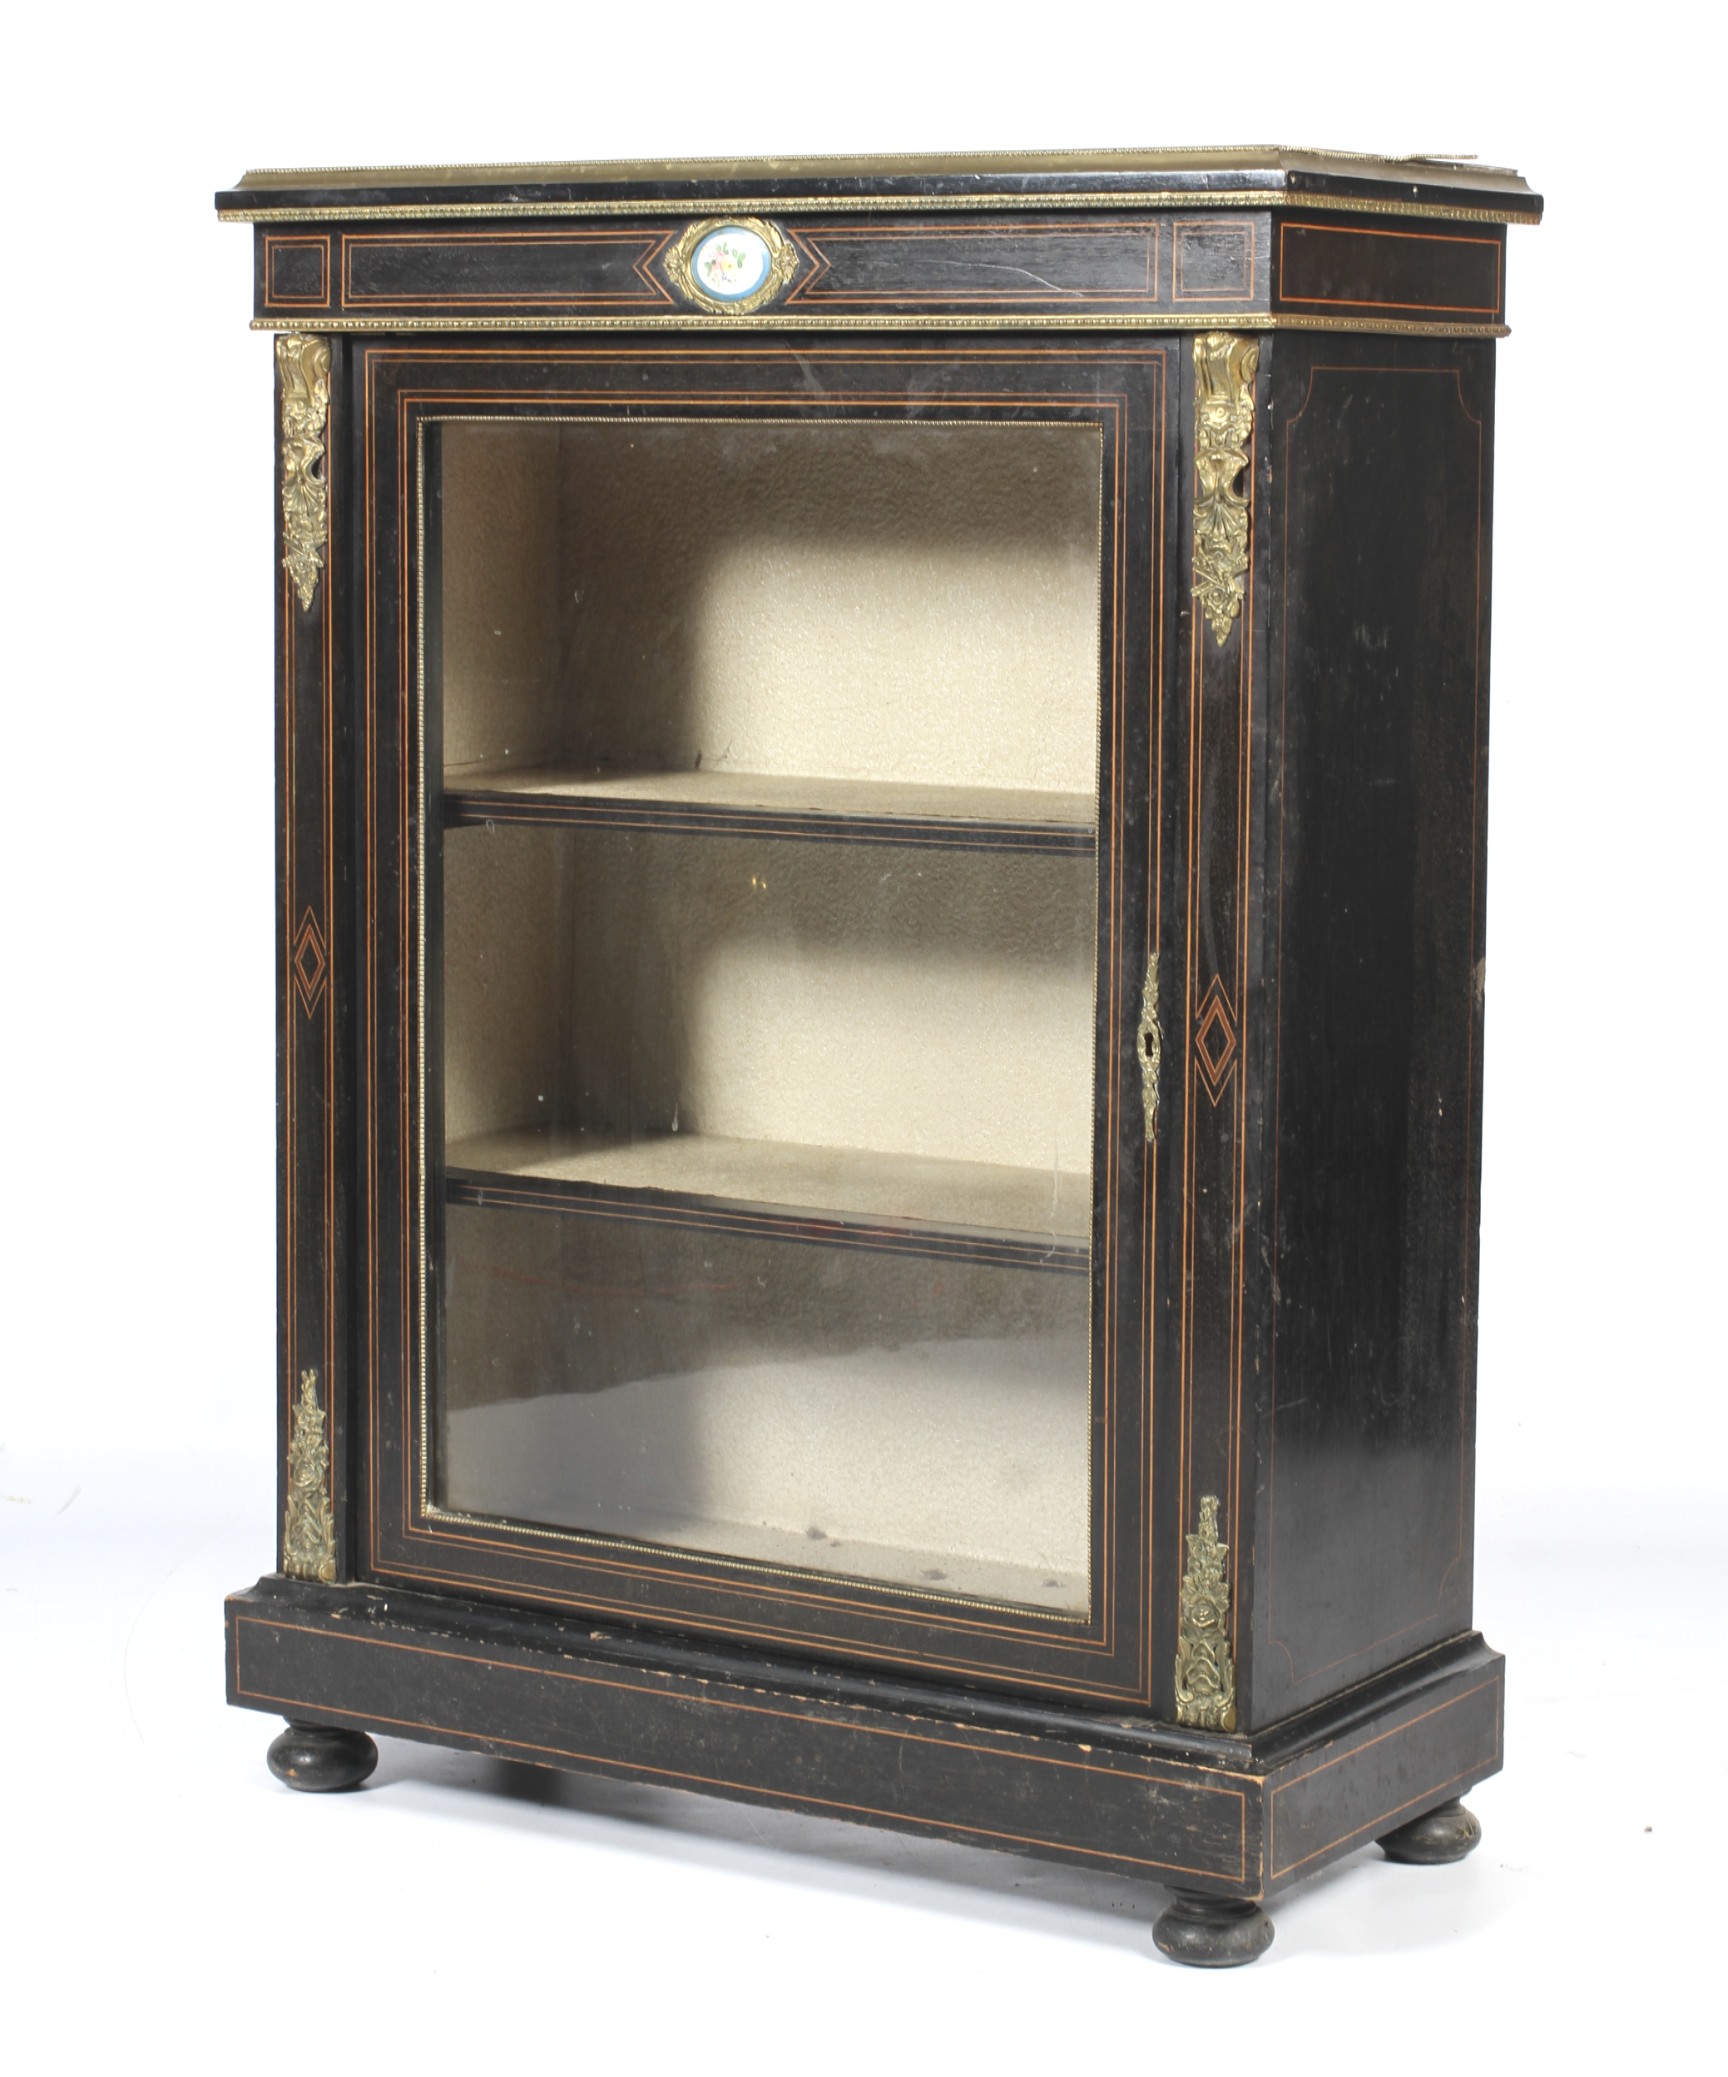 A 19th Century French ebonised gilt-metal mounted pier cabinet.